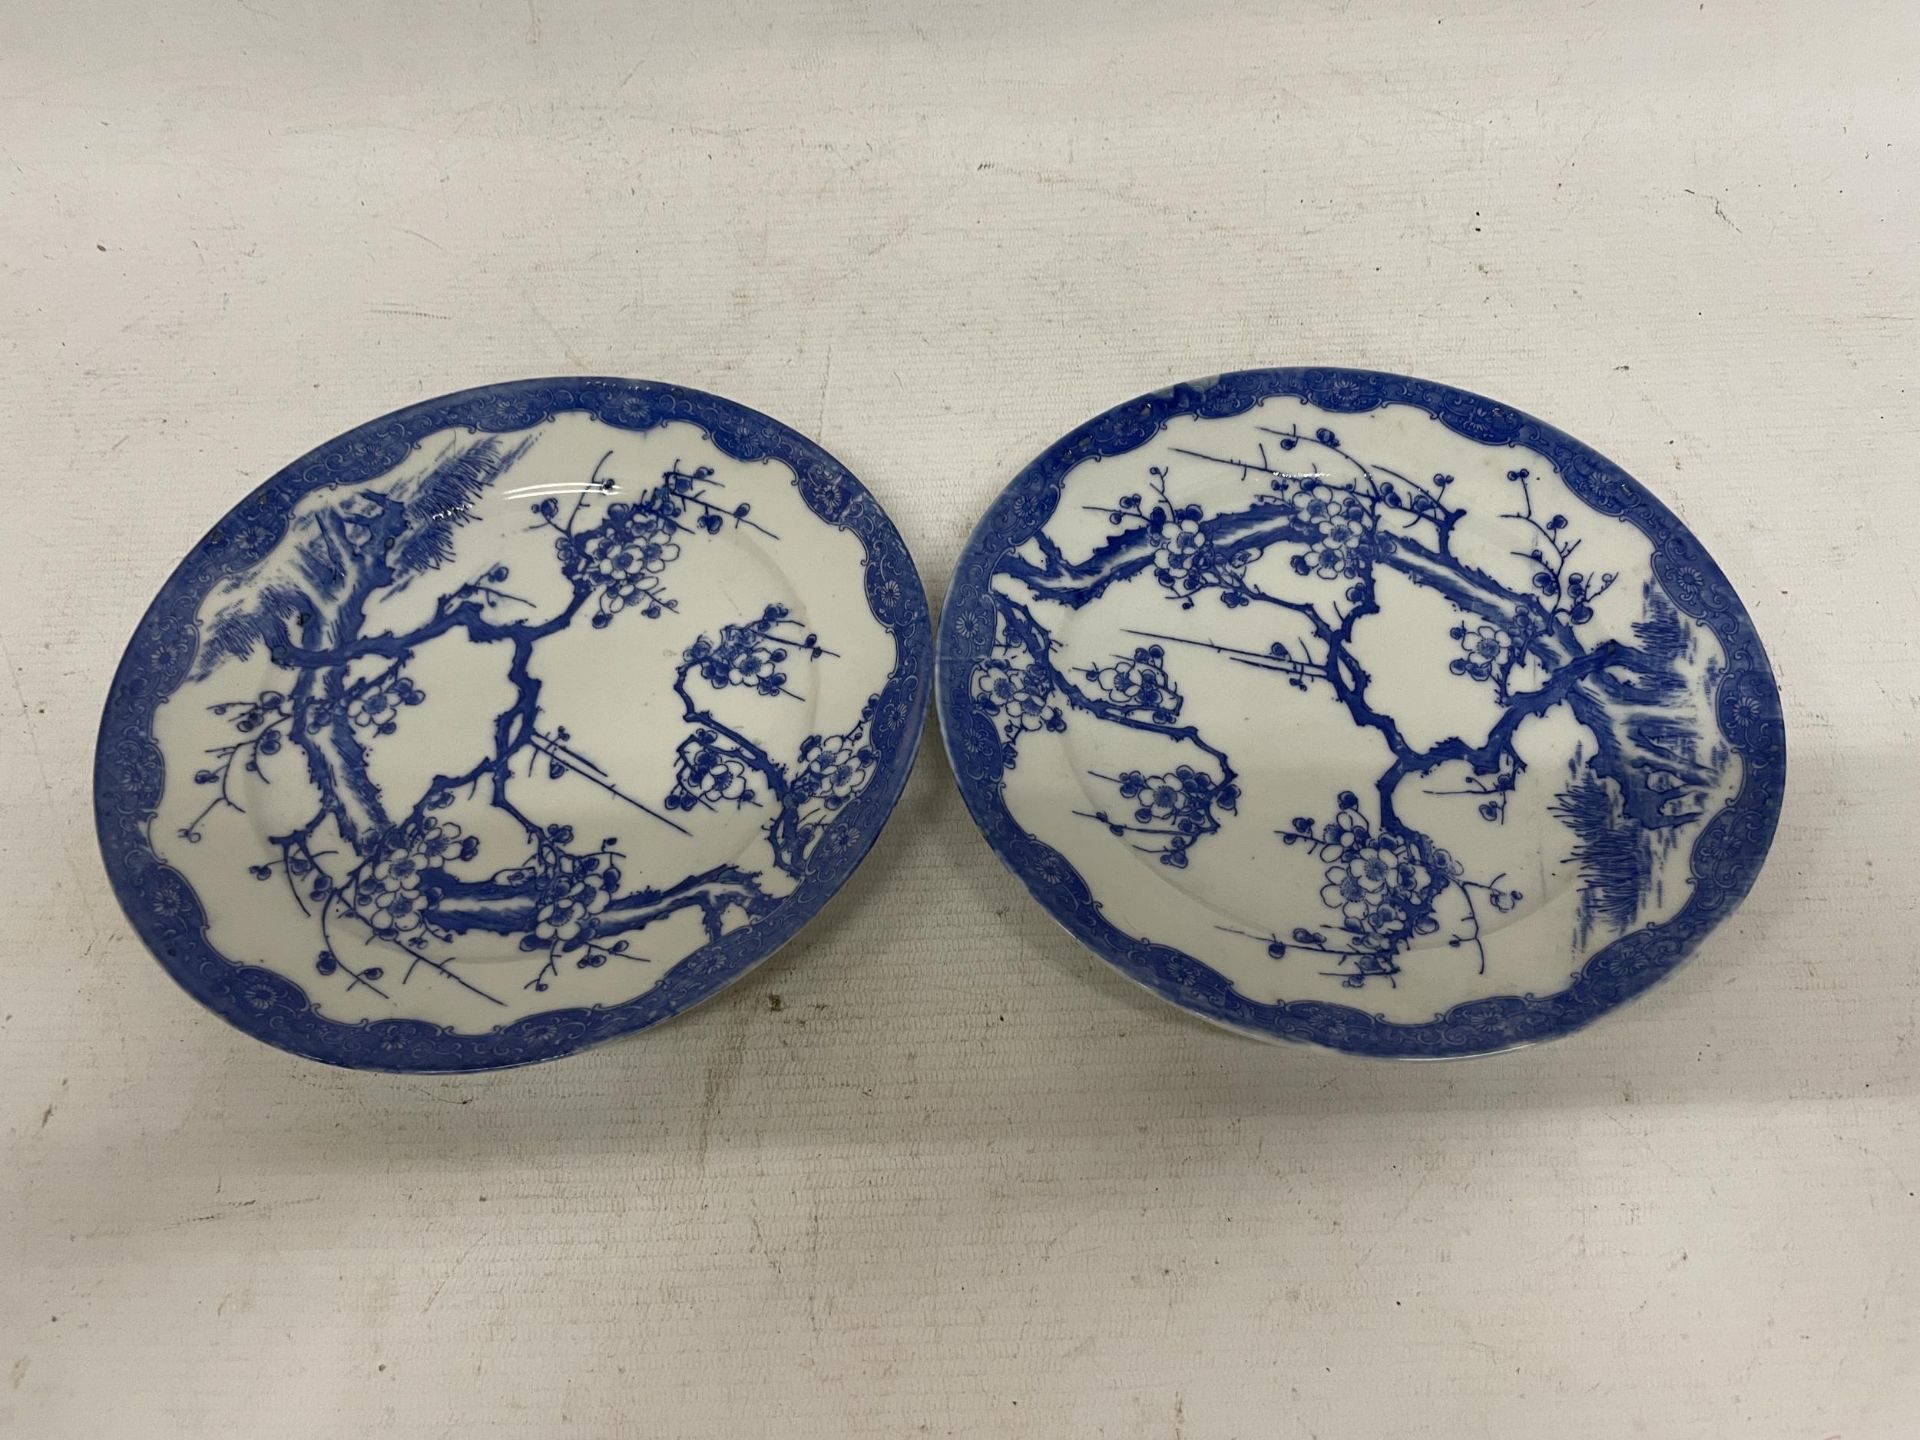 A PAIR OF JAPANESE BLUE AND WHITE PORCELAIN PLATES